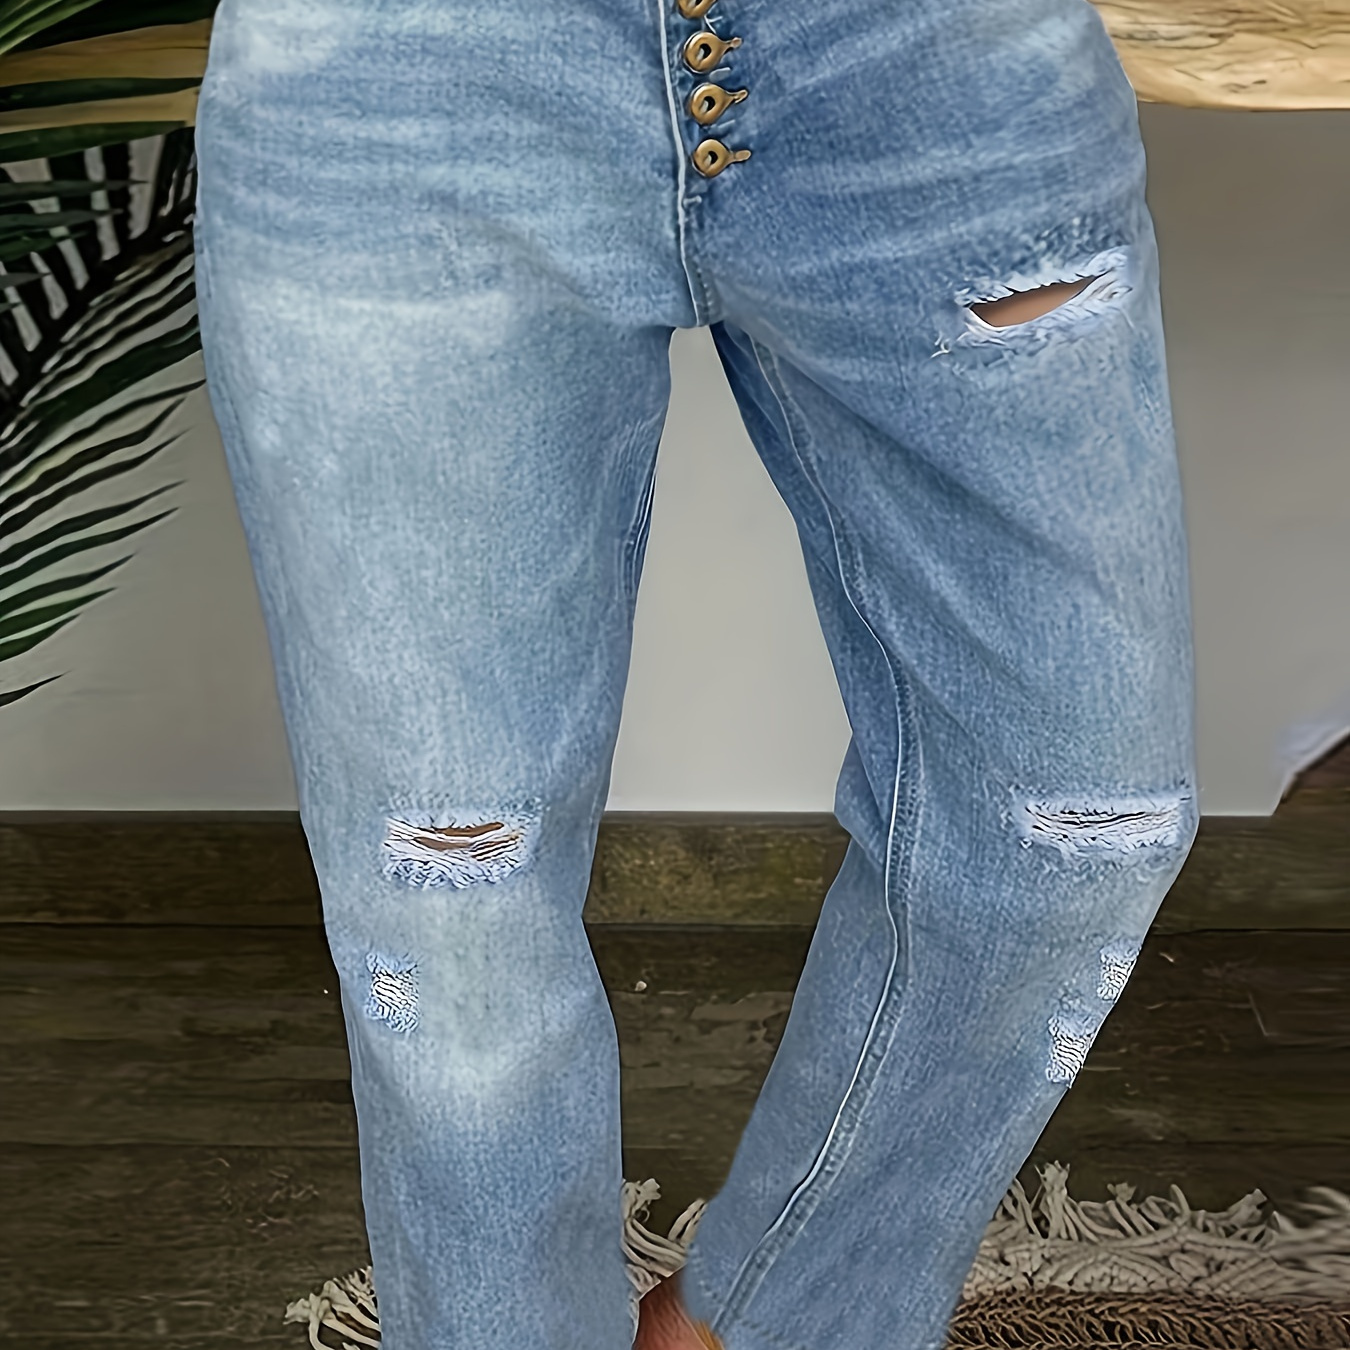 

Women's Plus Size Fashion Lightweight Loose Fit Casual Ripped Distressed Denim Jeans, Relaxed Style